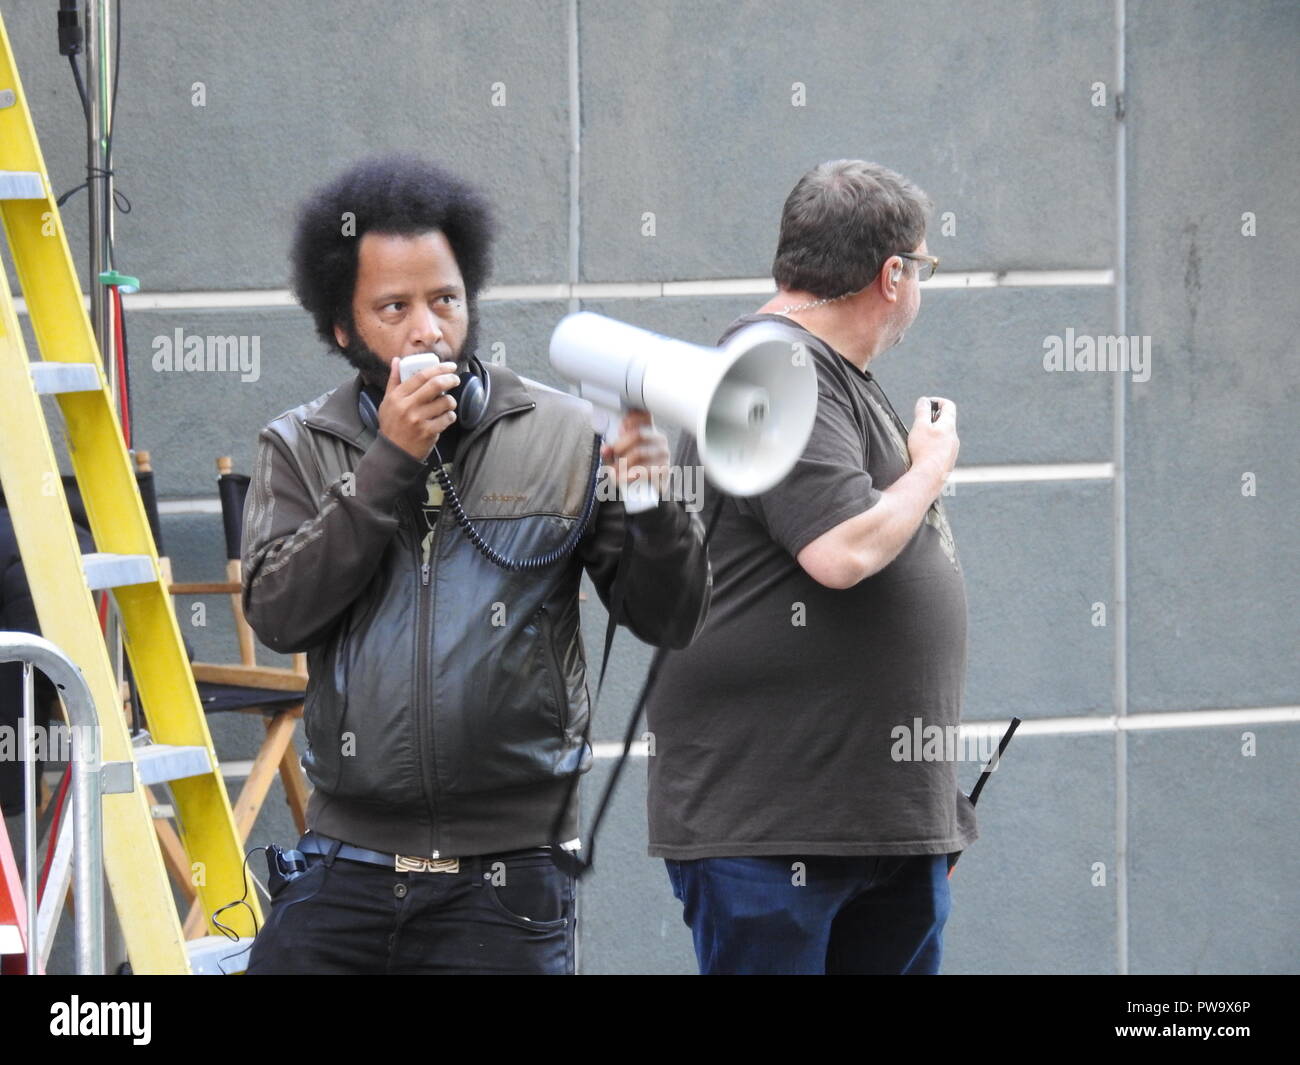 Rapper Boots Riley of the Coup on set on July 14, 2017, in downtown Oakland while directing his first movie, Sorry to Bother You. The film is a science fiction comedy set in Oakland and follows telemarketer Cassius Green, played by Lakieth Stanfield, who discovers a dark secret while climbing the corporate ladder. Stock Photo